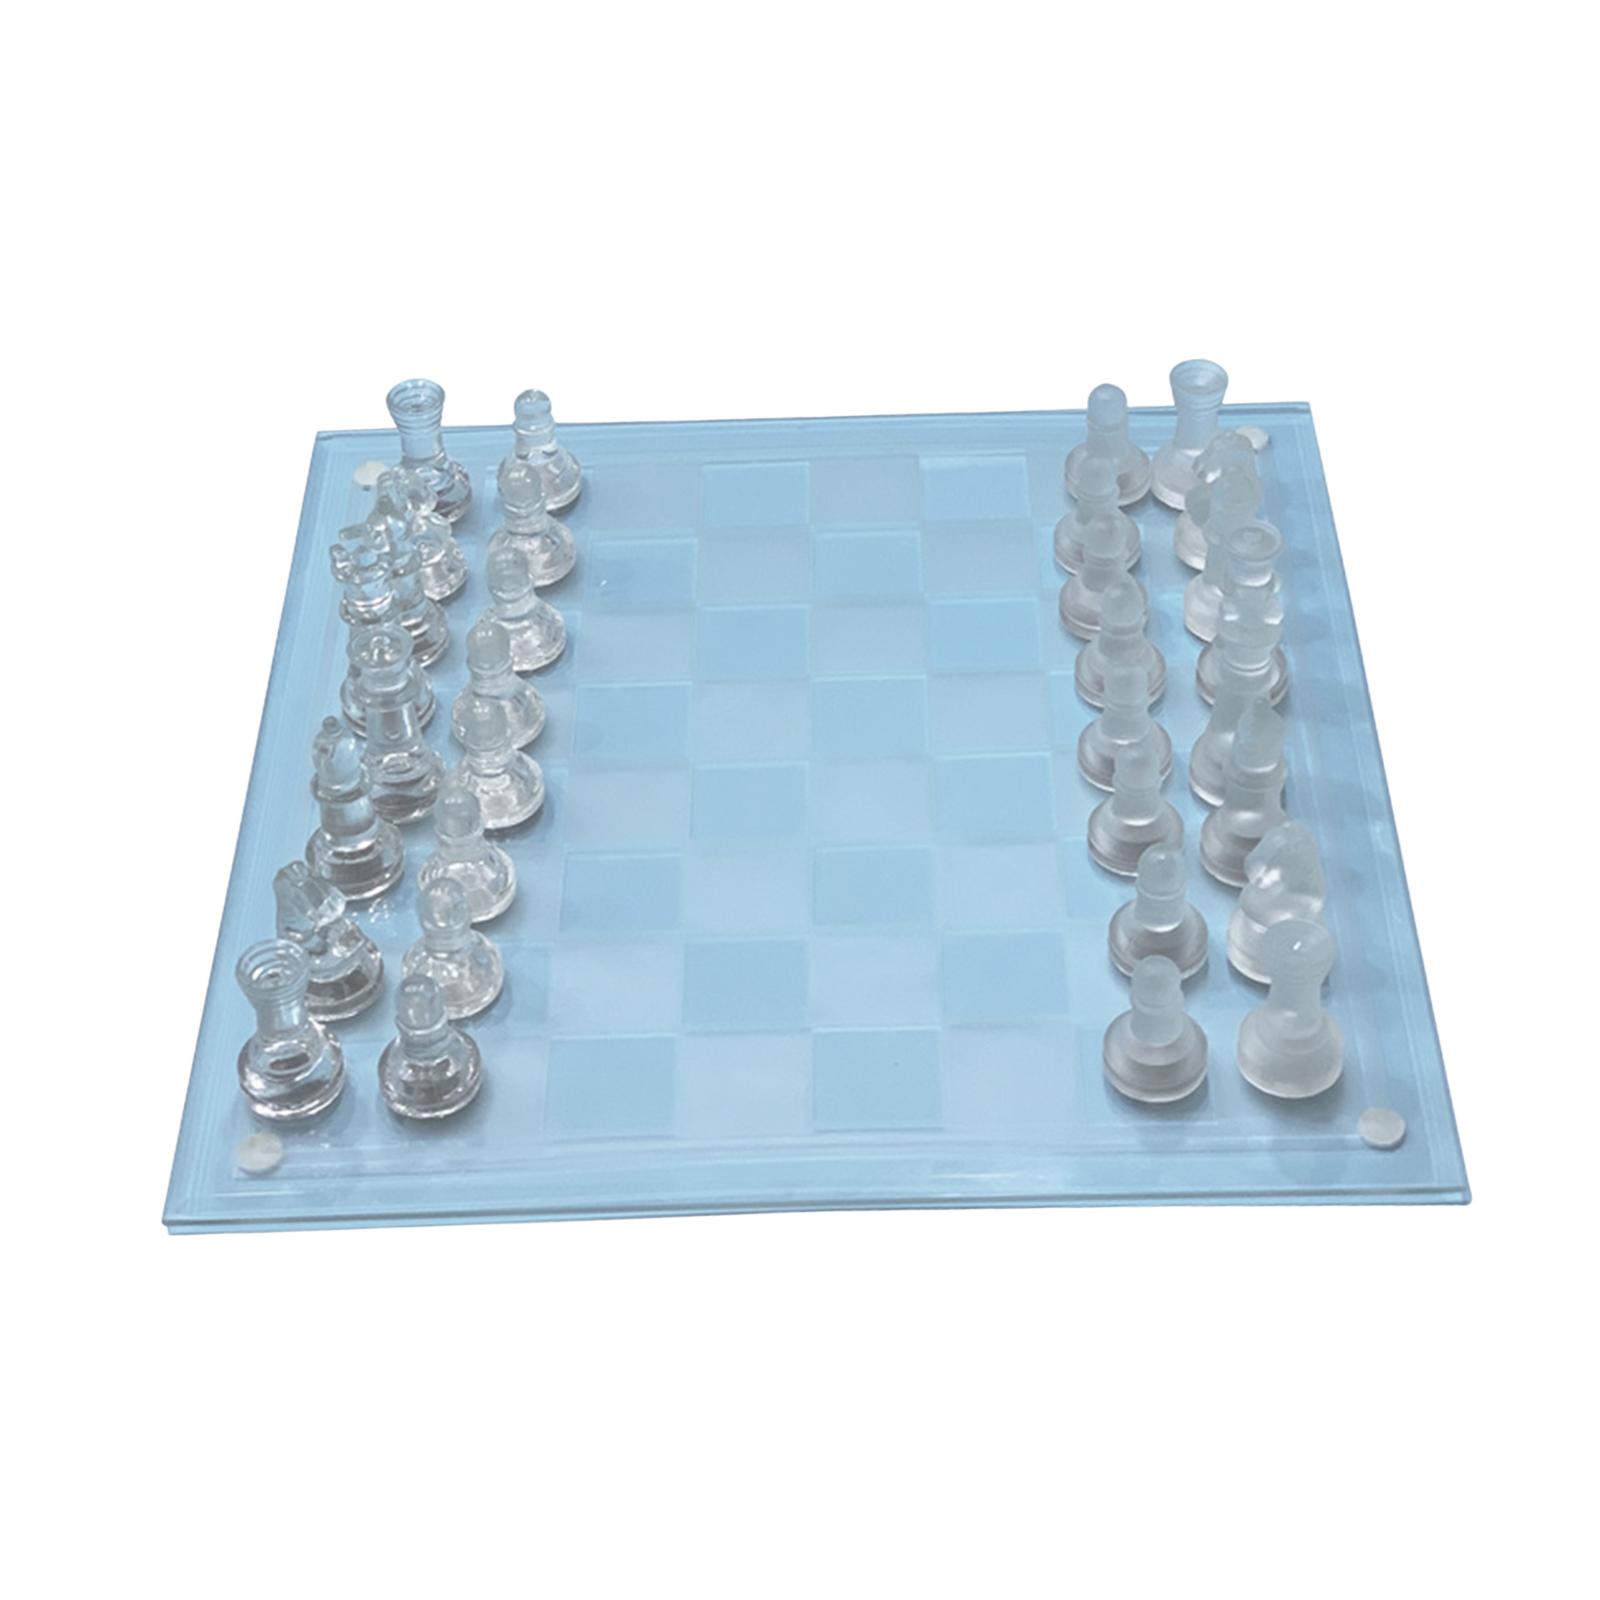 Glass Chess Game, Crystal Chess Board, Adults Play Set, Frosted Chess Board Set, Classic Strategy Game for Party, Interaction Activity Festival - image 4 of 8